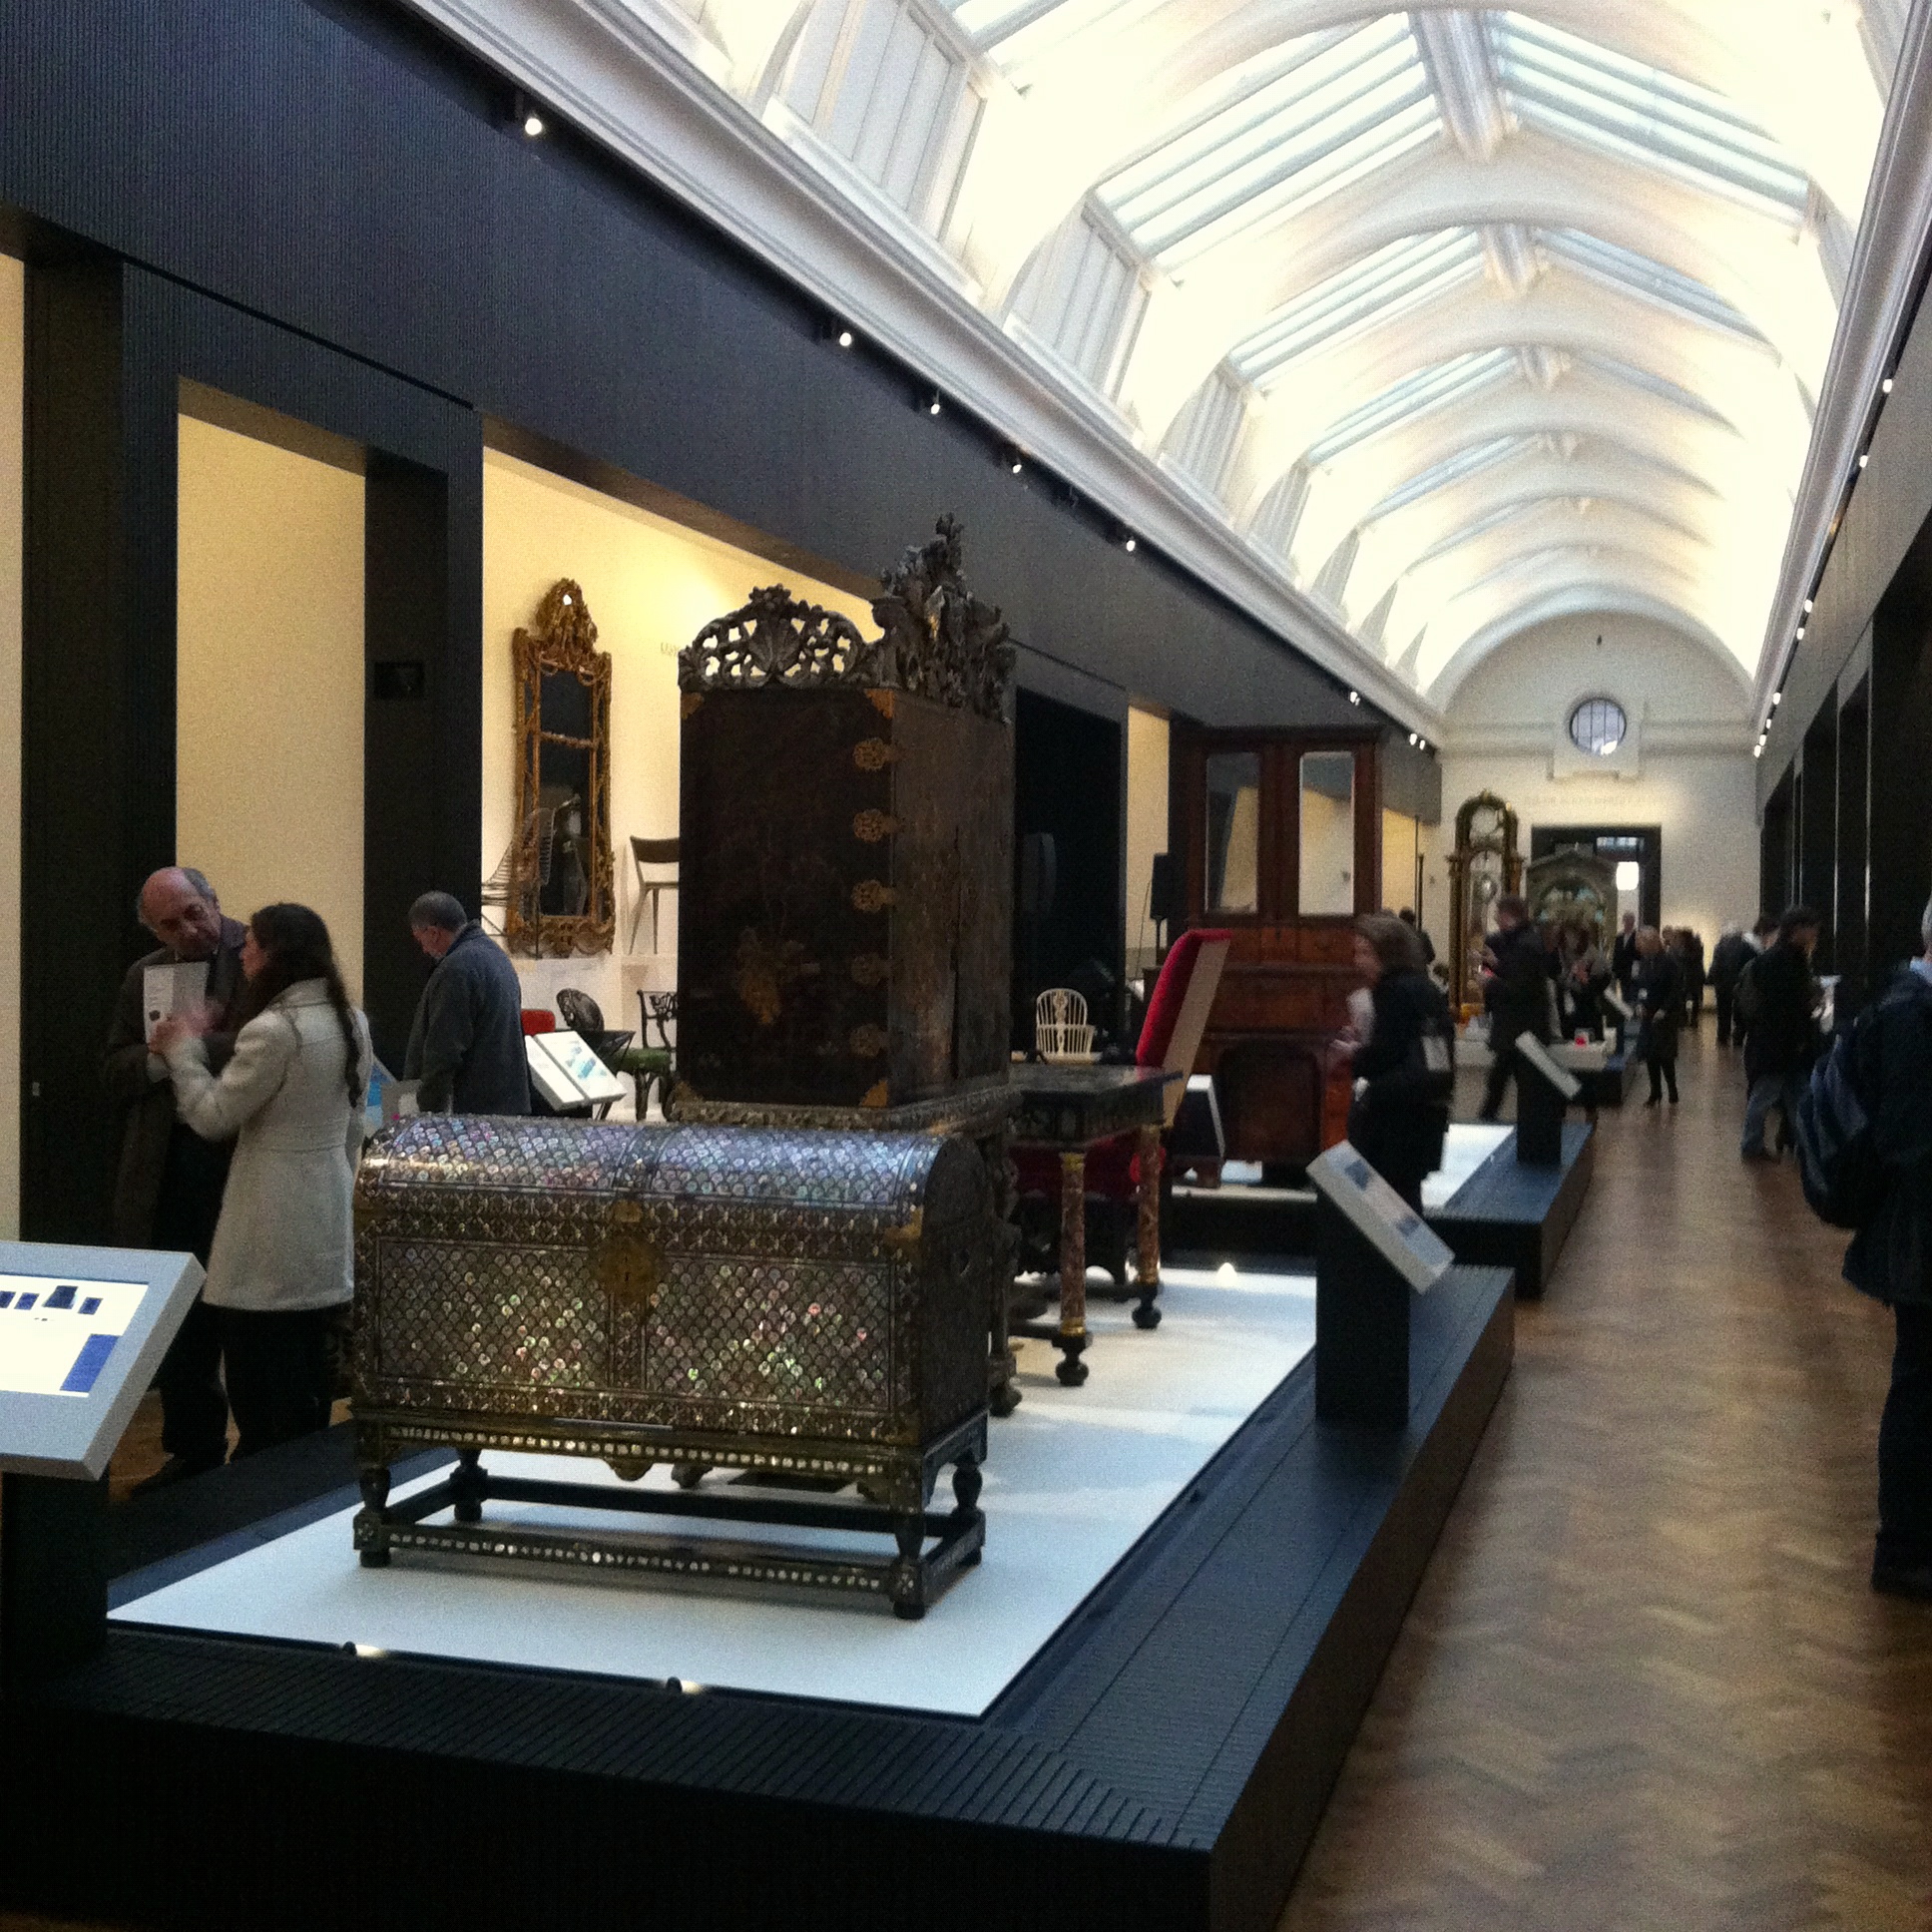 The V&A's Furniture Gallery was designed by NORD Architecture